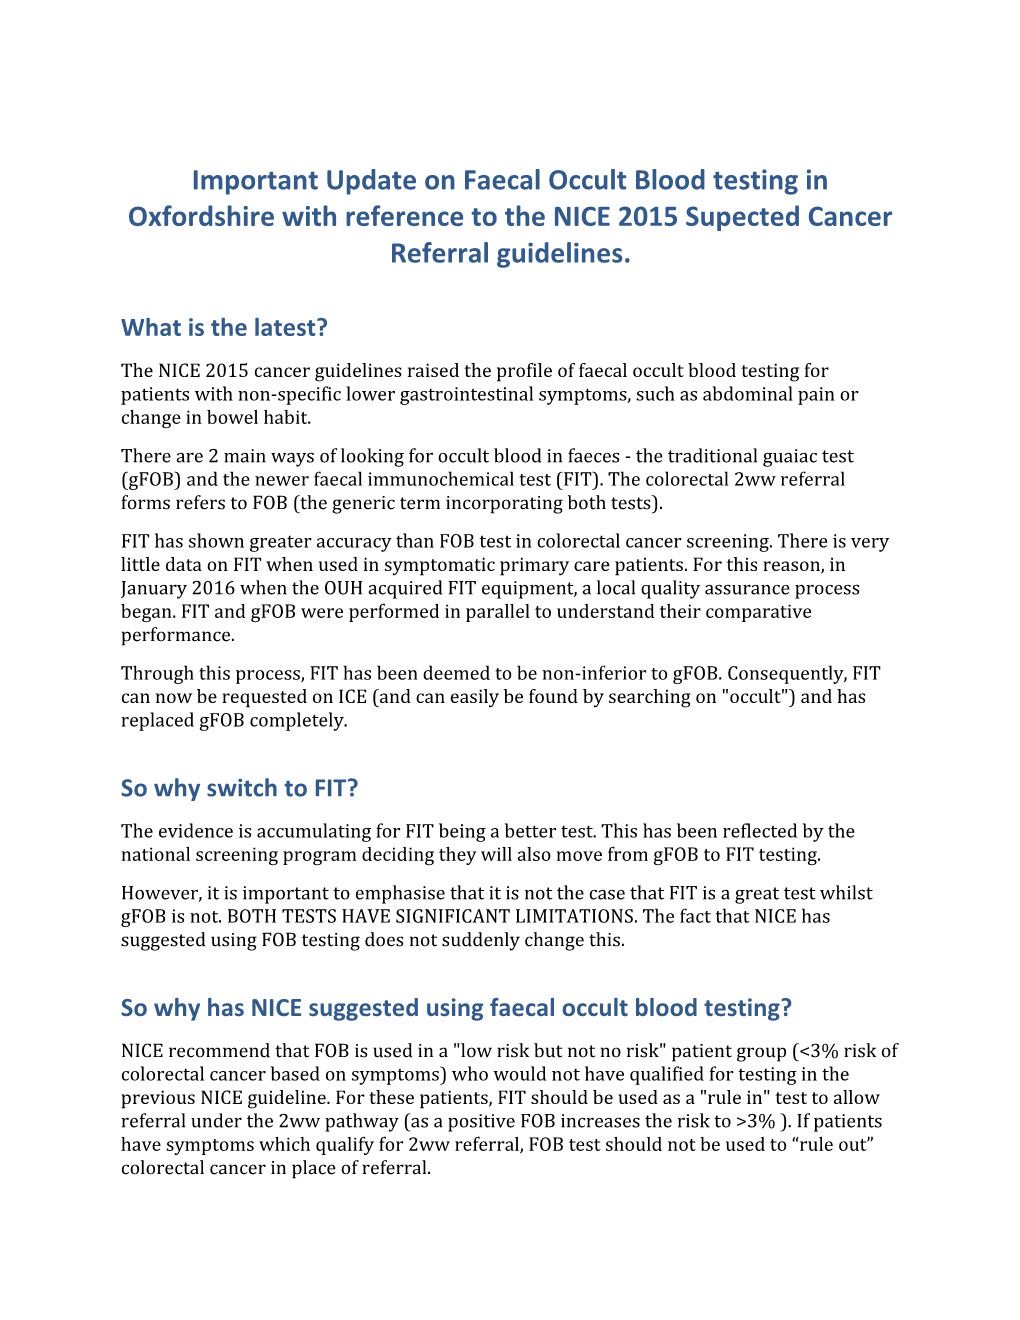 Important Update on Faecal Occult Blood Testing in Oxfordshire with Reference to the NICE